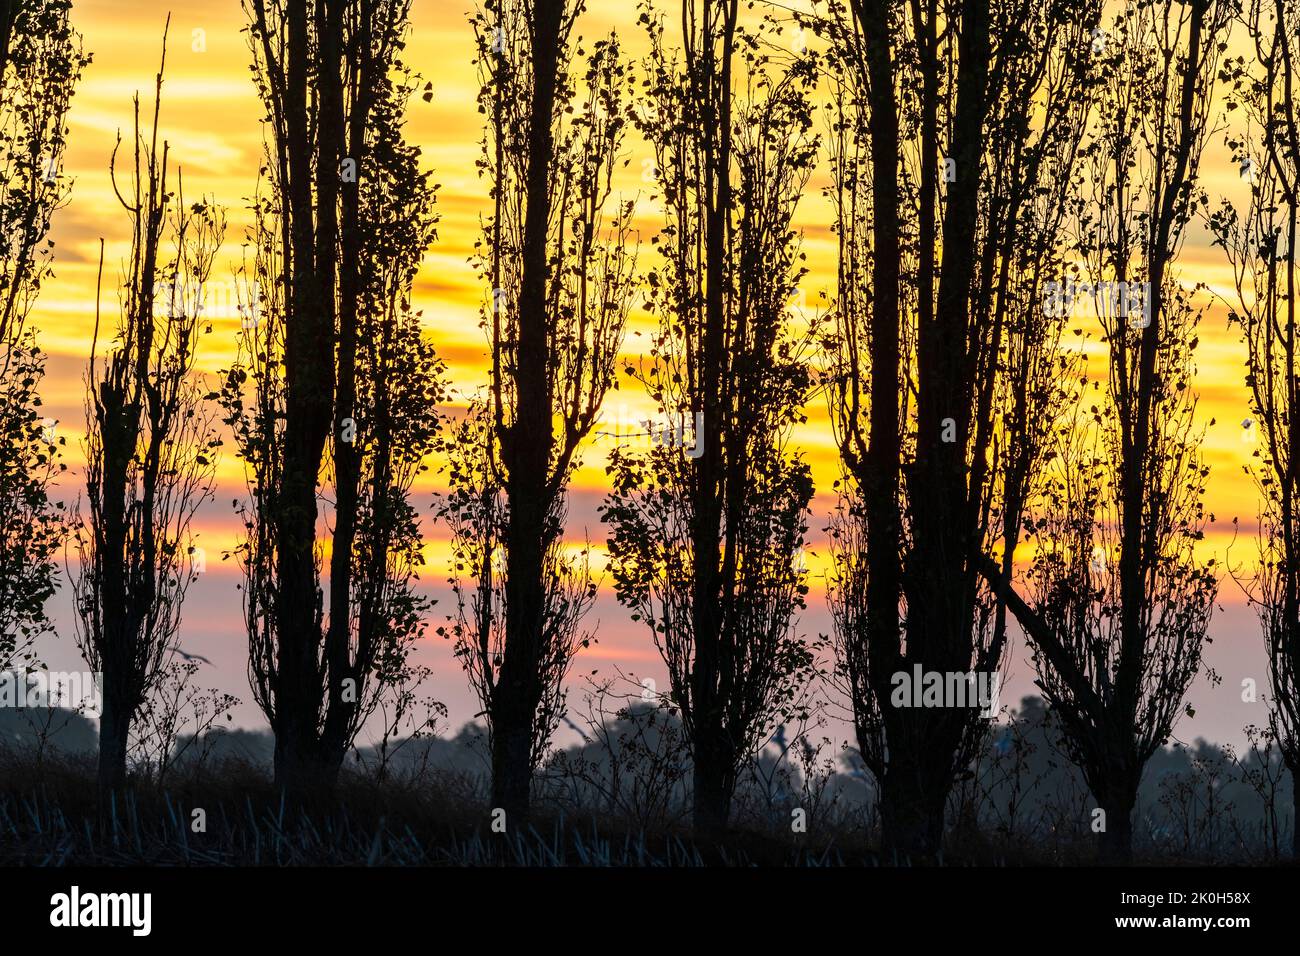 The dawn sky seen through a row of silhouetted poplar trees in the autumn. Defocused sky behind the trees with streakers of mauve and yellow-orange colour layers. Stock Photo